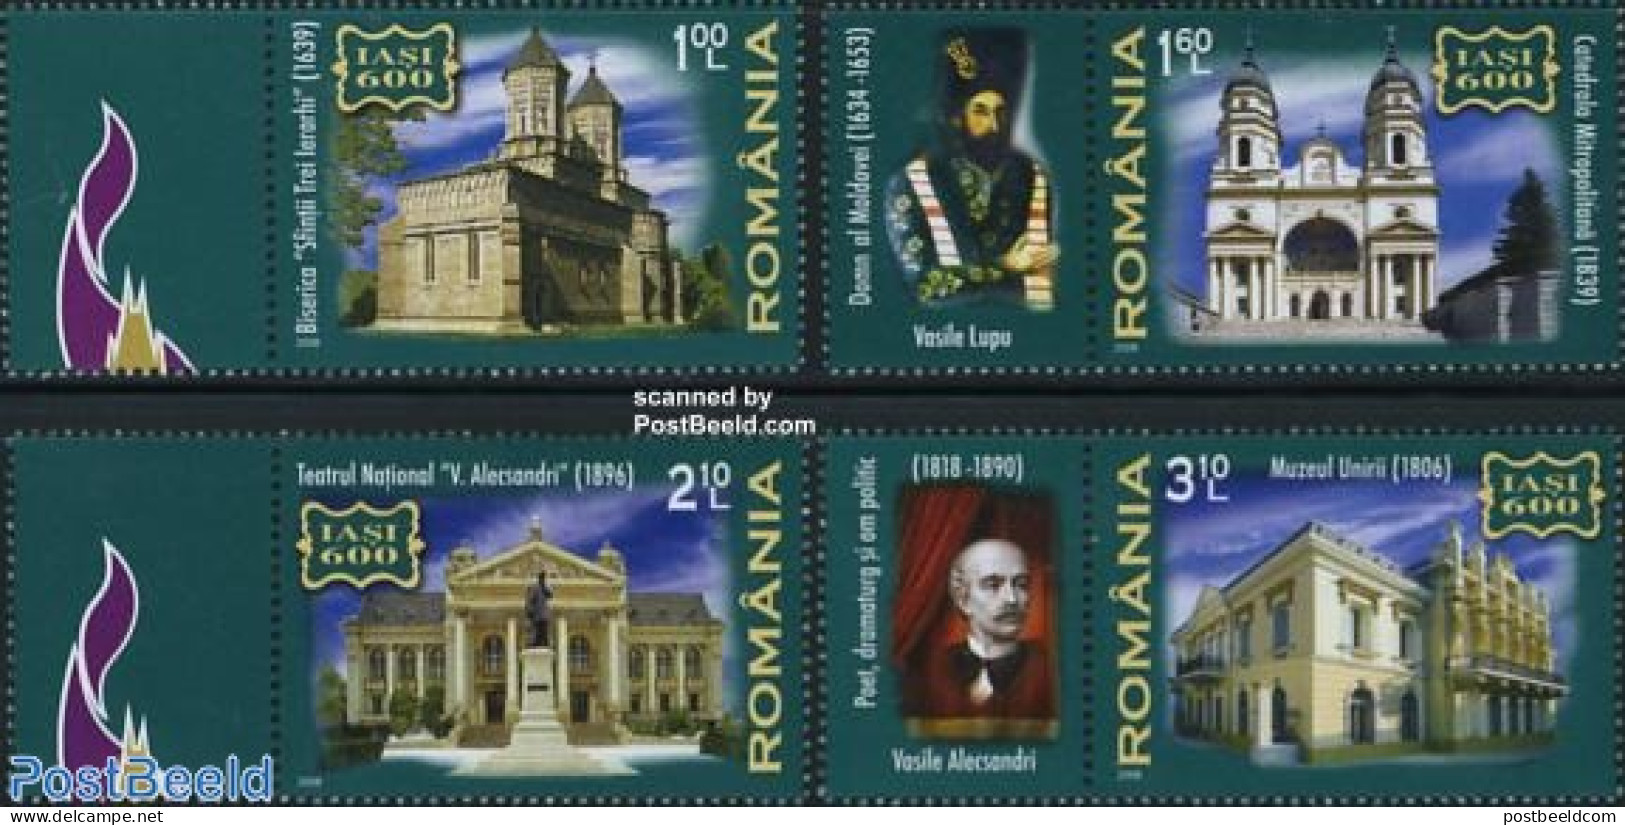 Romania 2008 Iasi 4v, Mint NH, Architecture - Unused Stamps